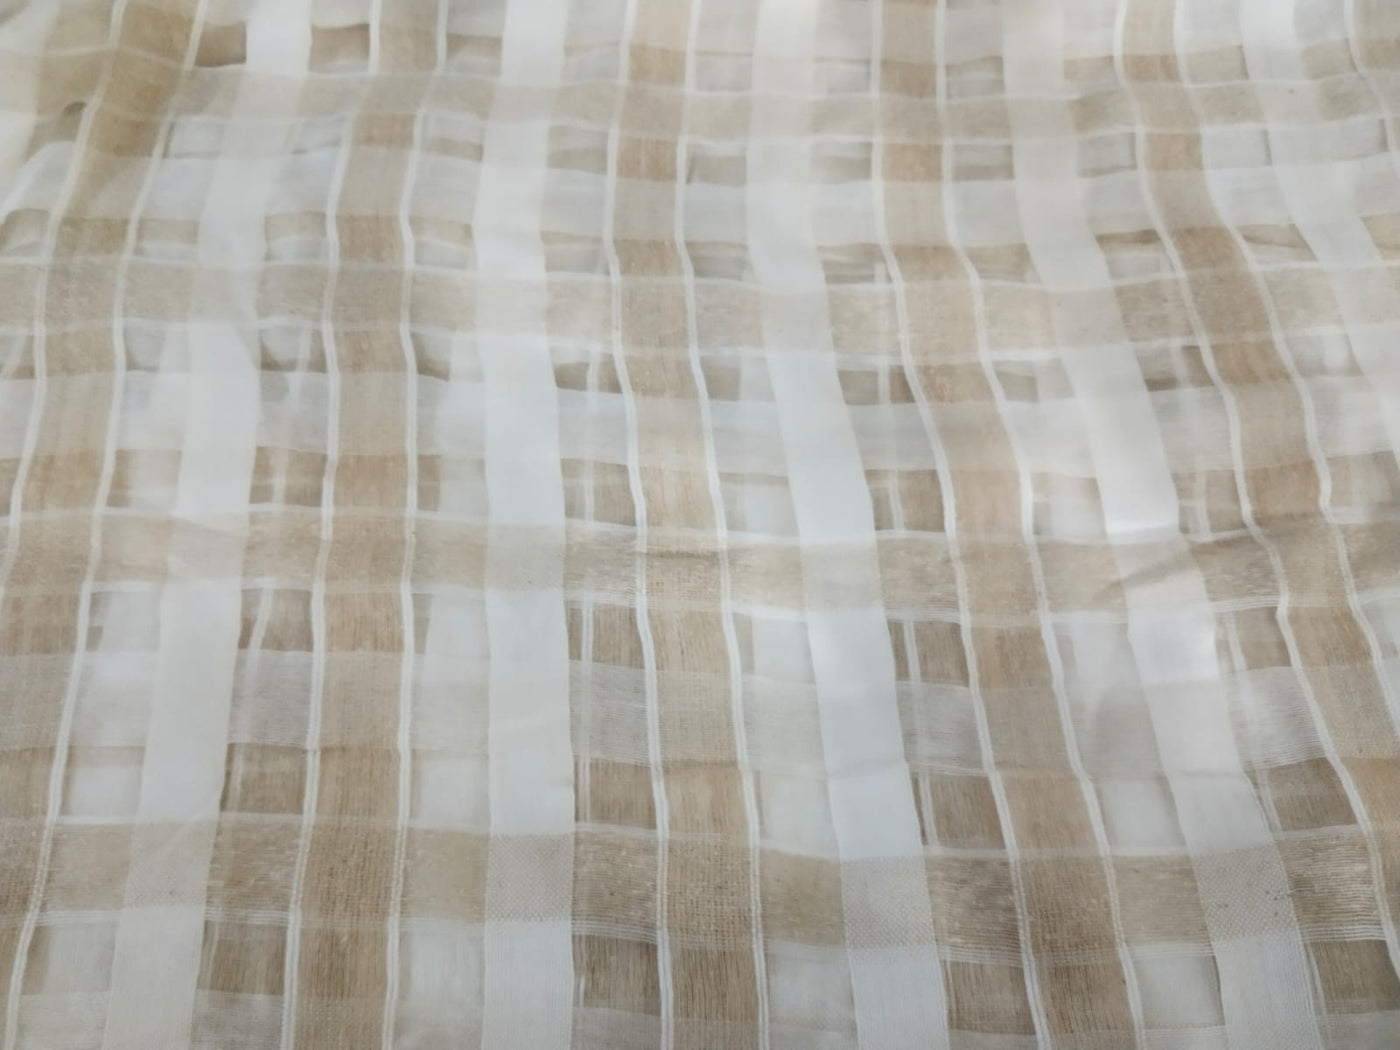 SEMI SILK ORGANZA FABRIC GOLD AND IVORY COLOR FANCY PLAIDS 56" WIDE [15302]